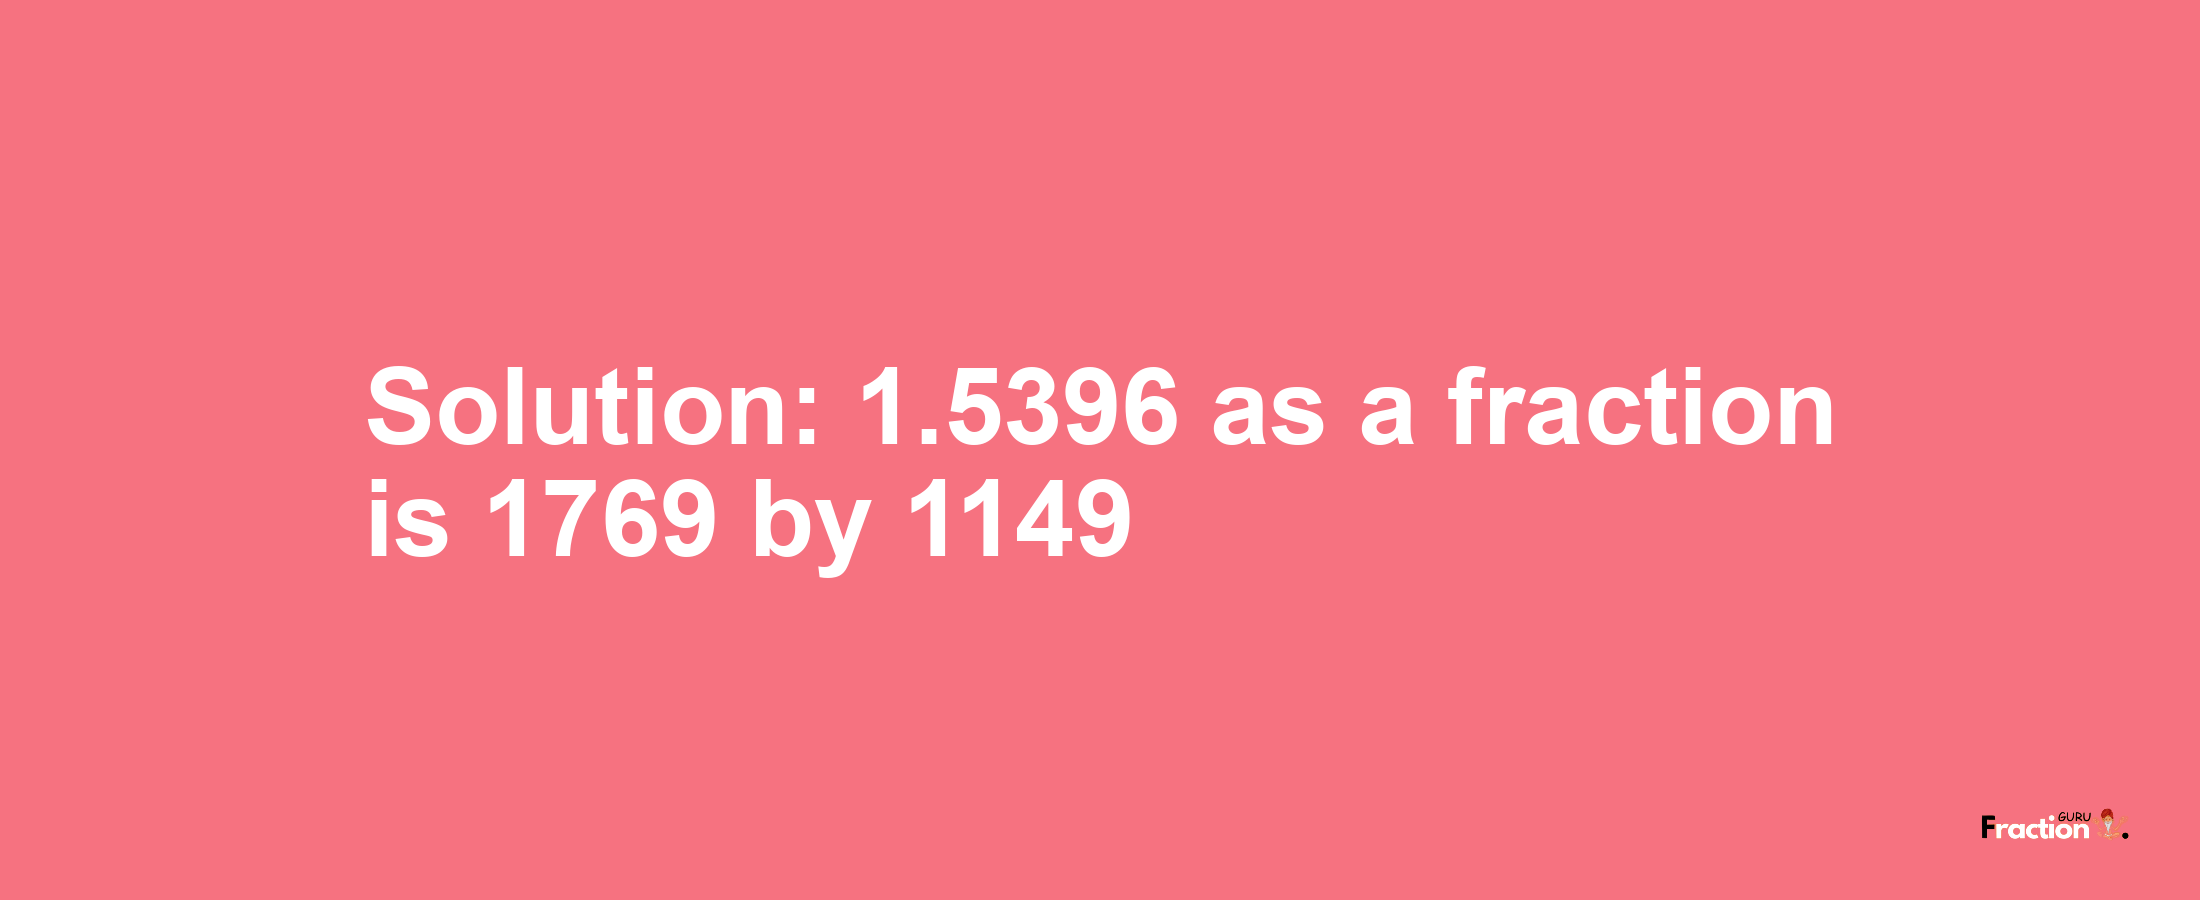 Solution:1.5396 as a fraction is 1769/1149